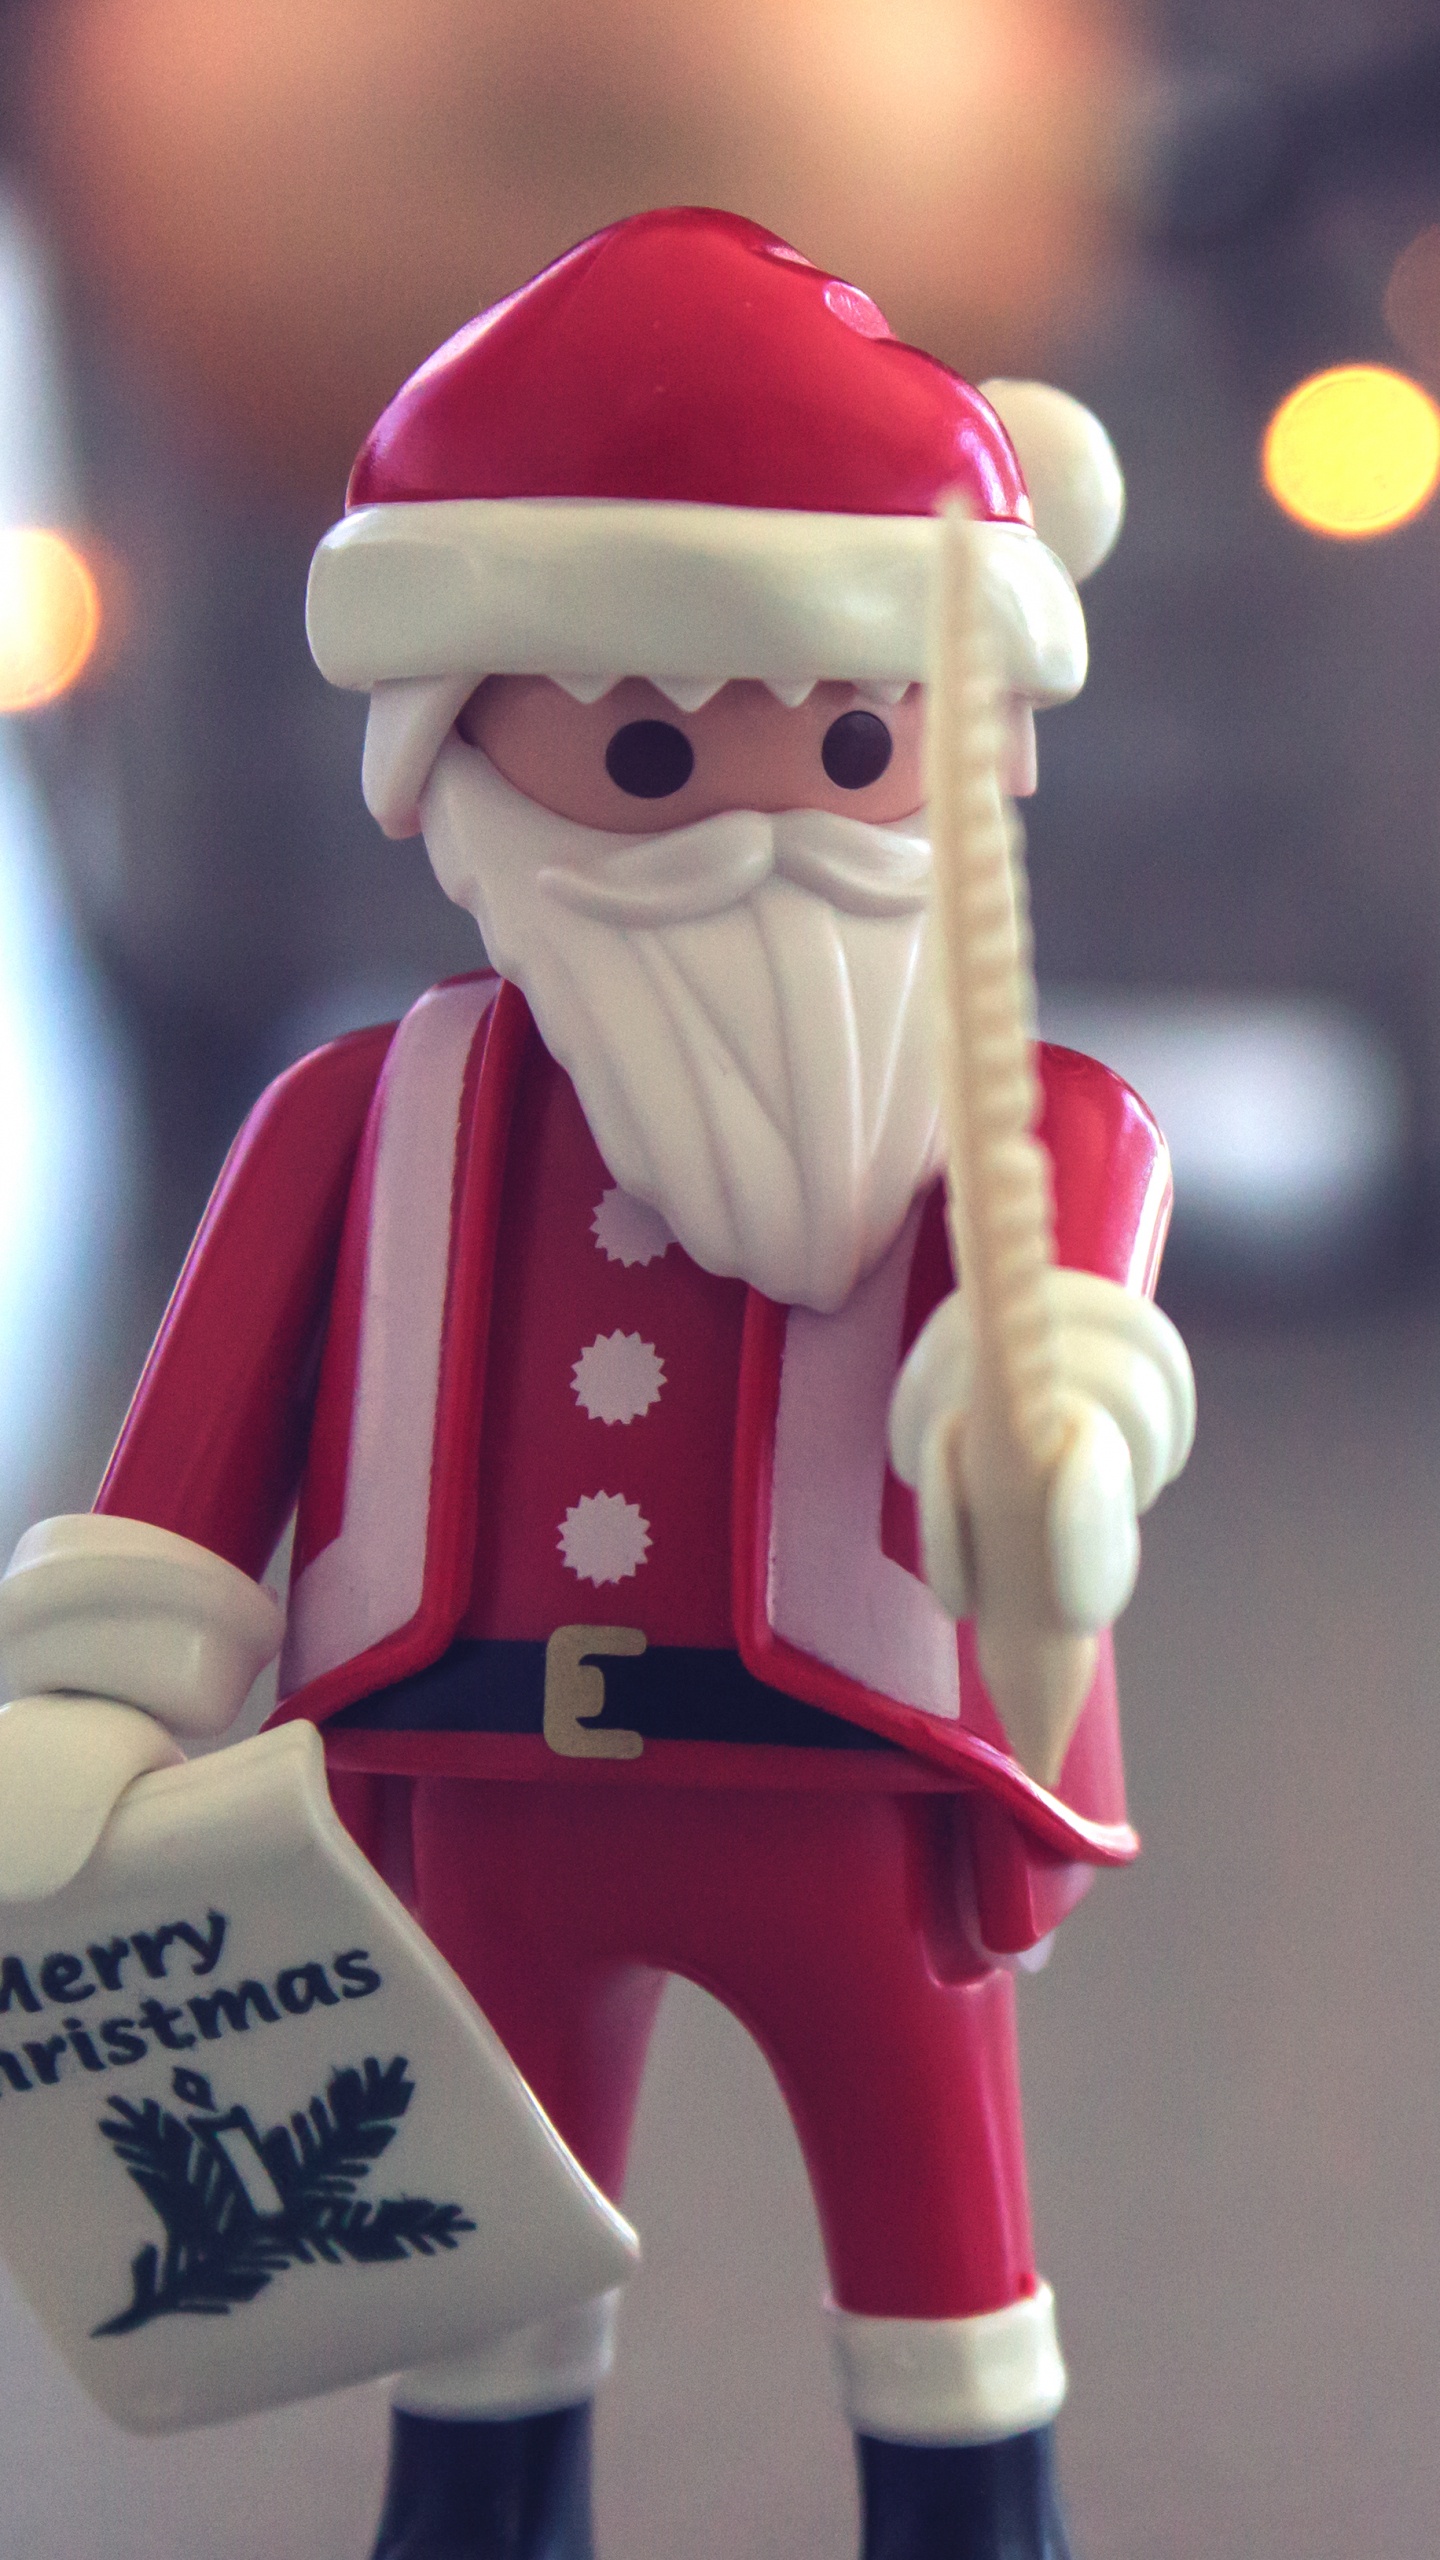 Santa Claus, Christmas Day, Figurine, Toy, Christmas. Wallpaper in 1440x2560 Resolution